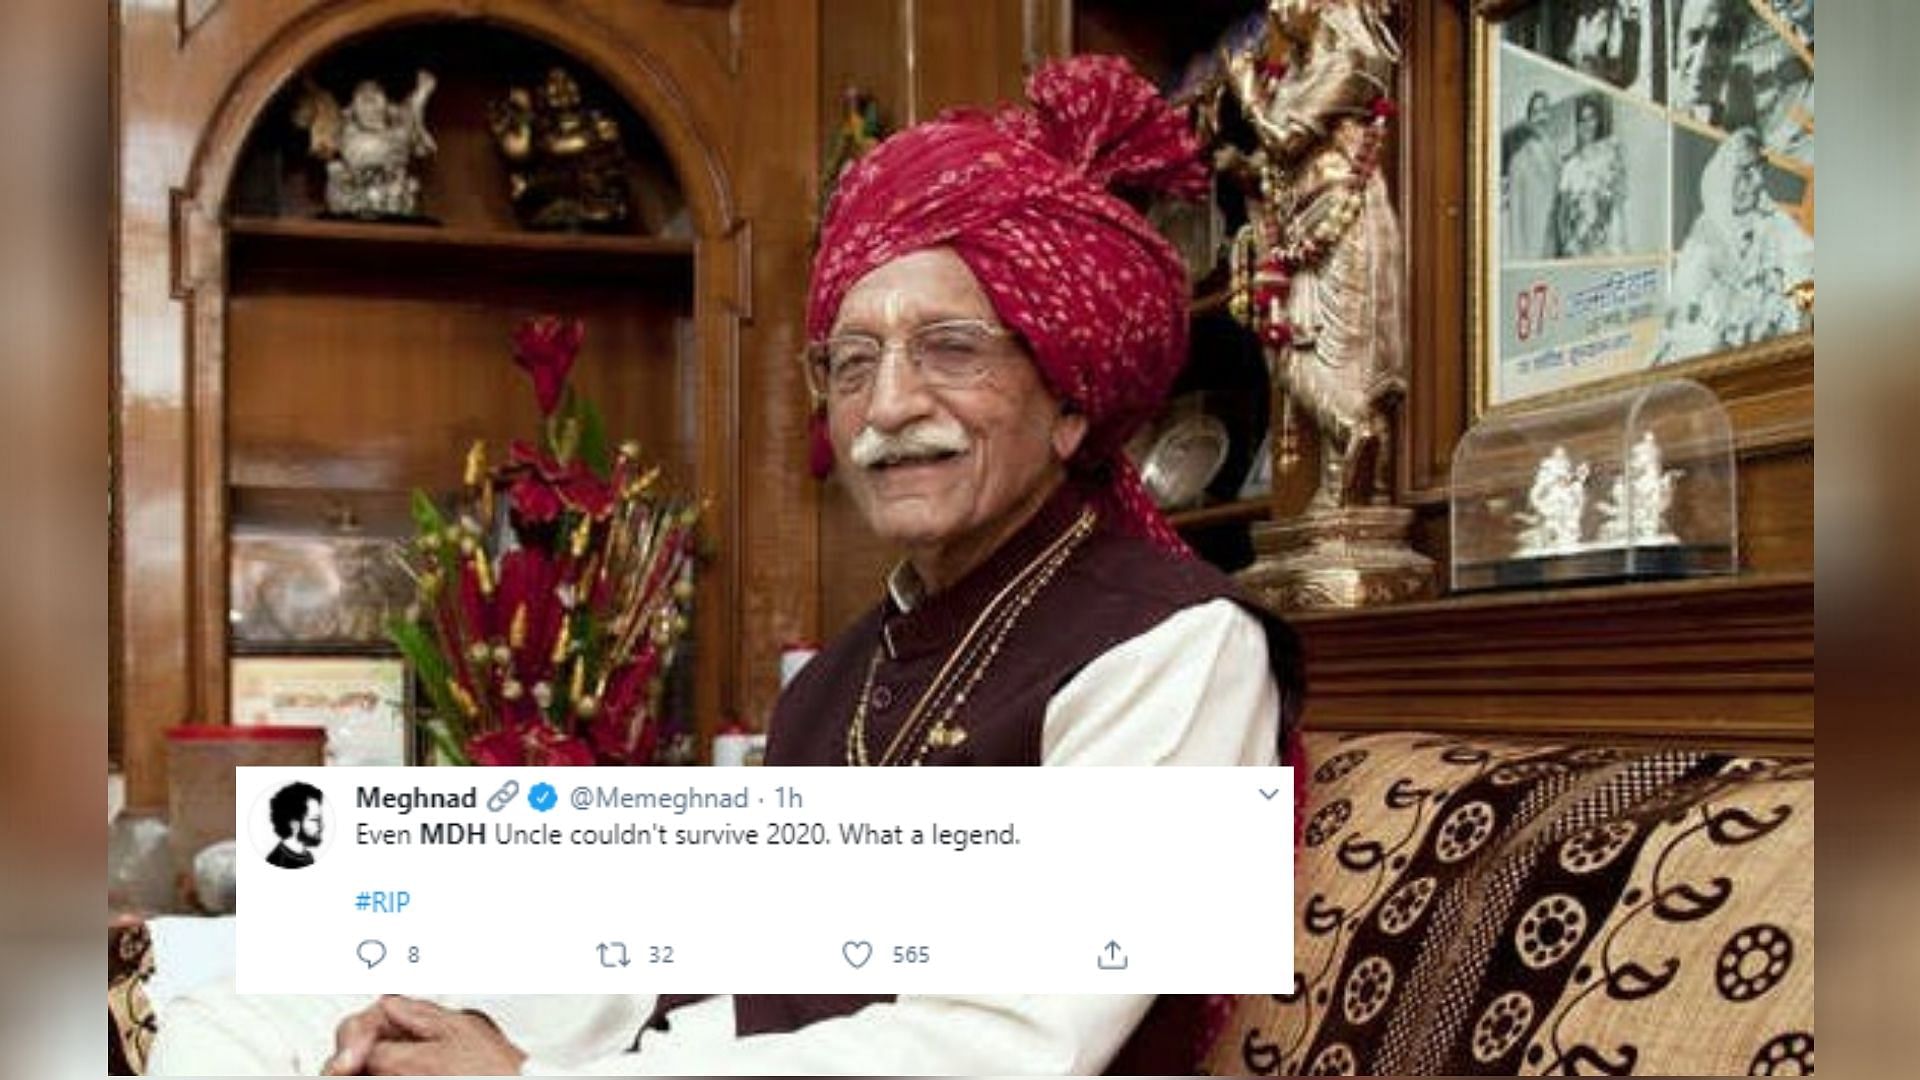 Twitter Mourns The Loss of Beloved ‘MDH Uncle’ Passes 